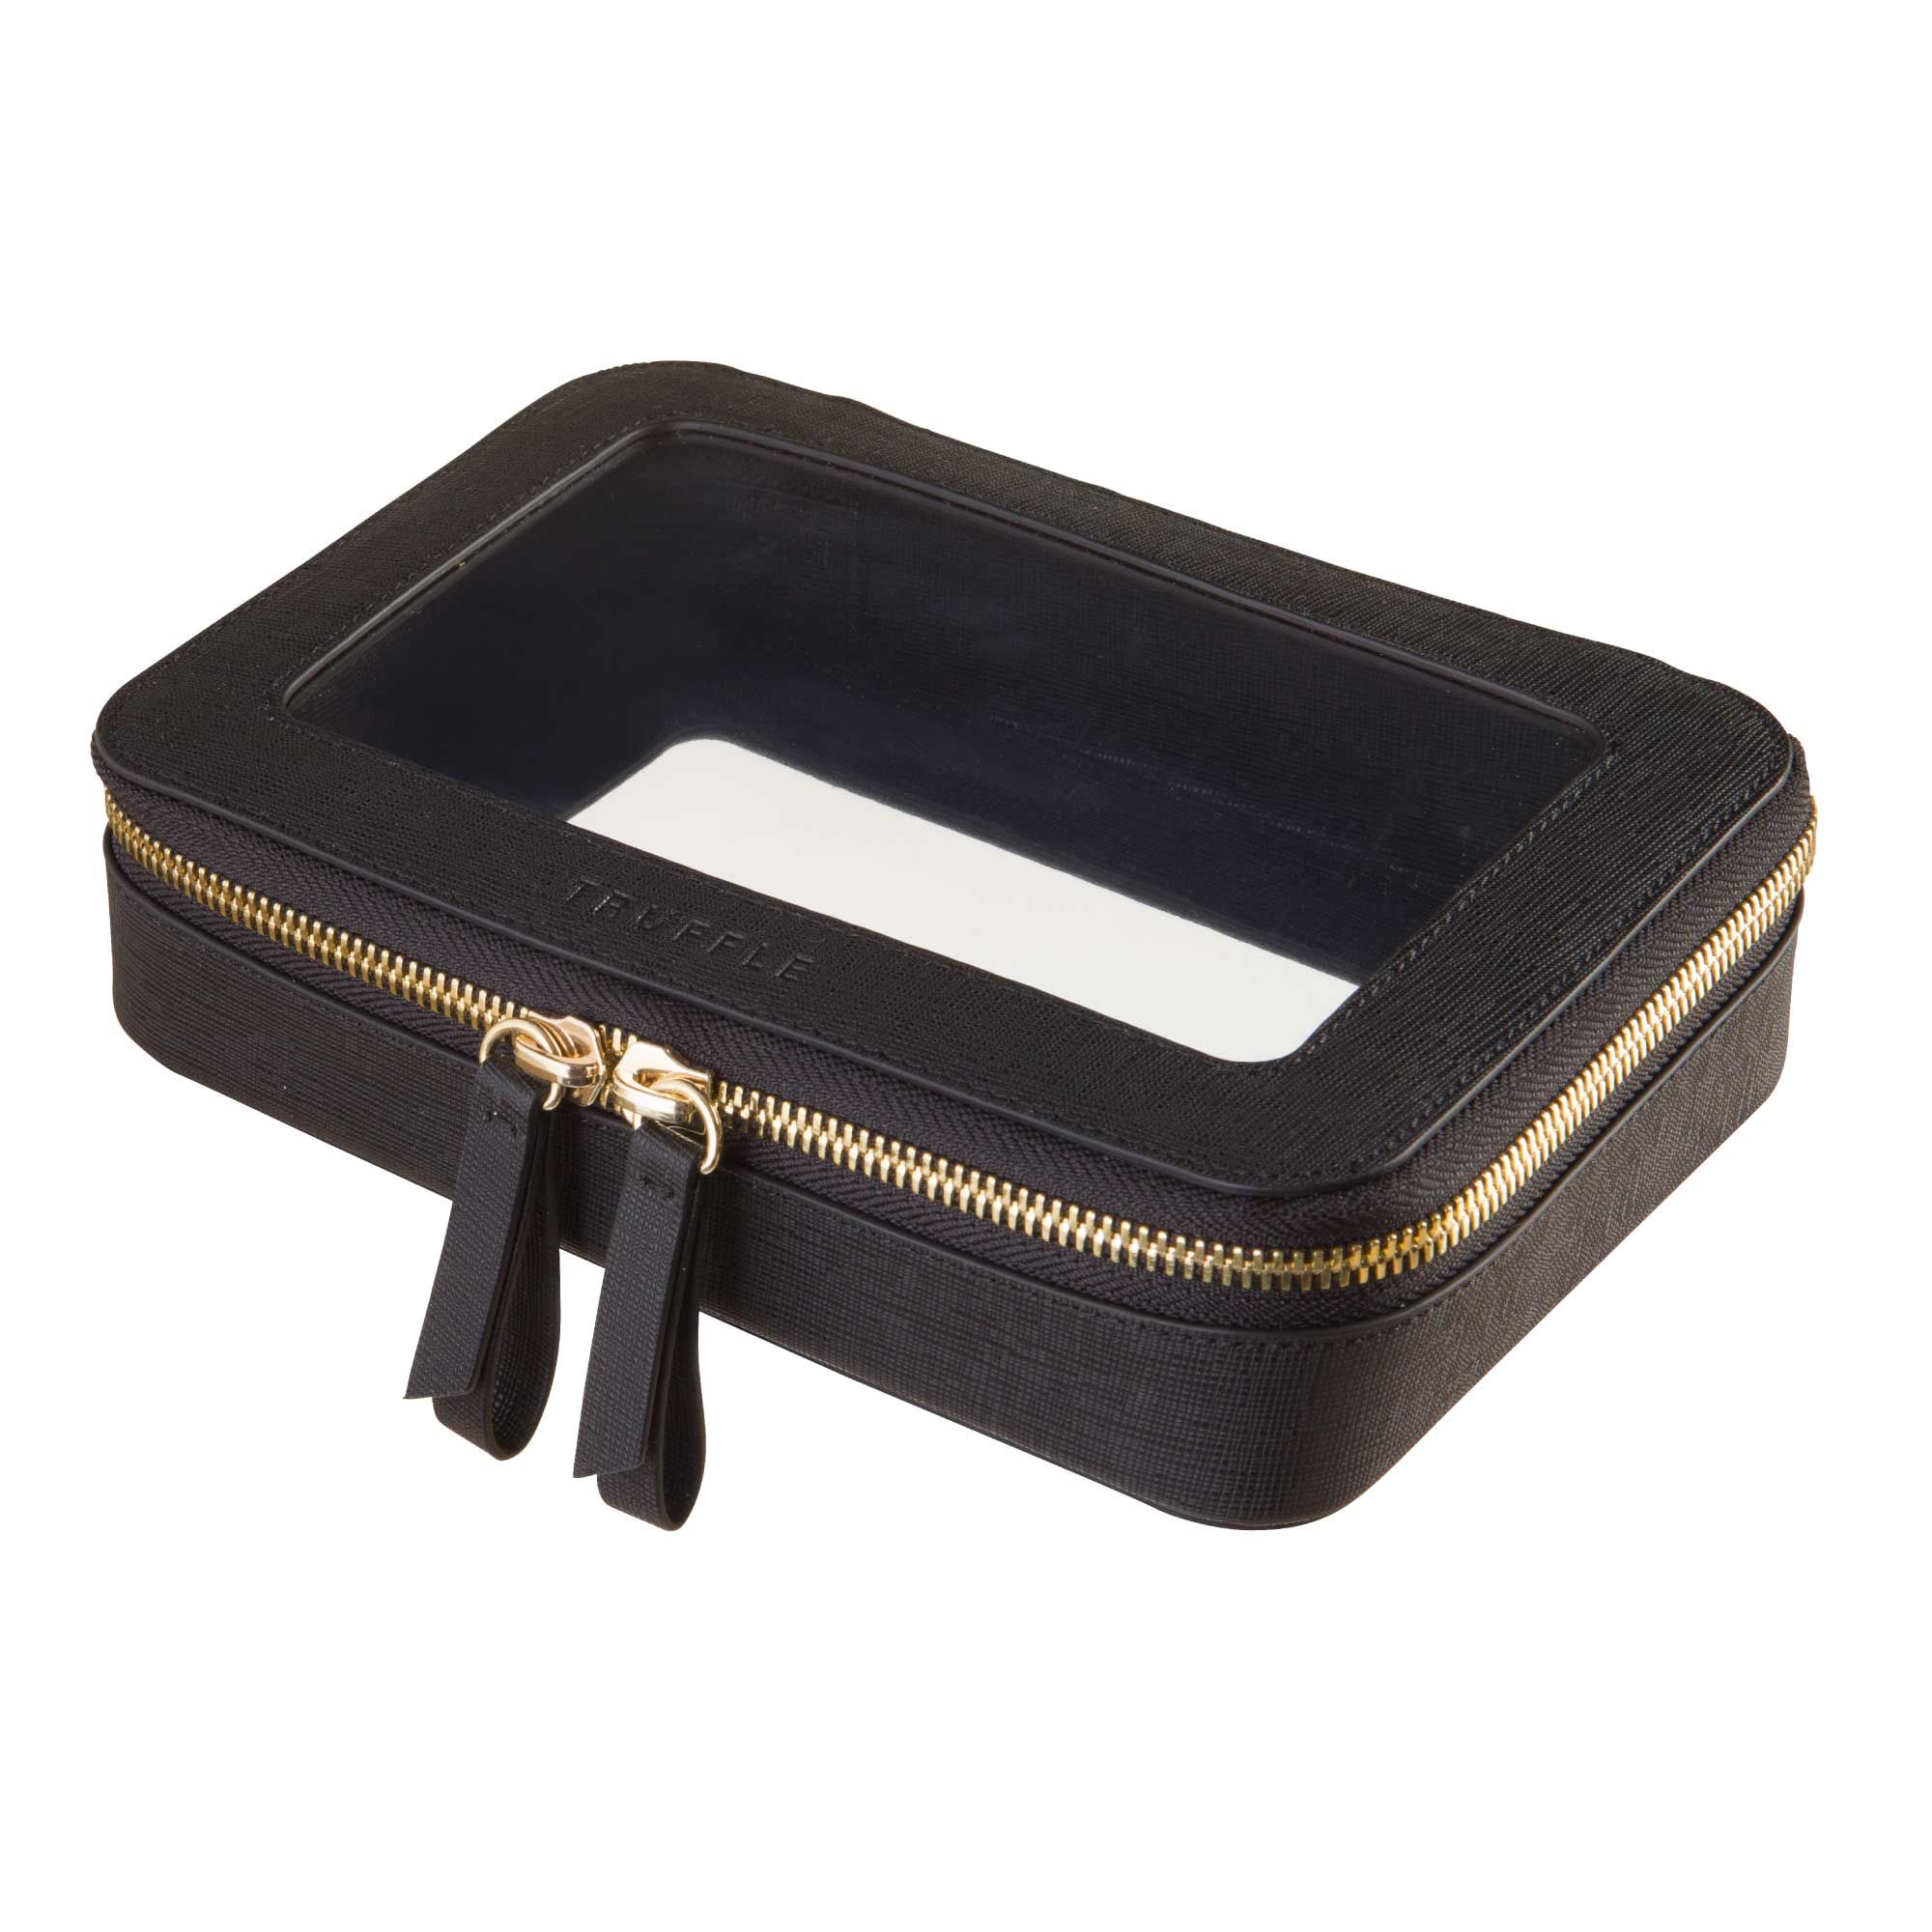 Makeup Travel Case | Traveling Makeup Case | Cosmetic Travel Case | TRUFFLE